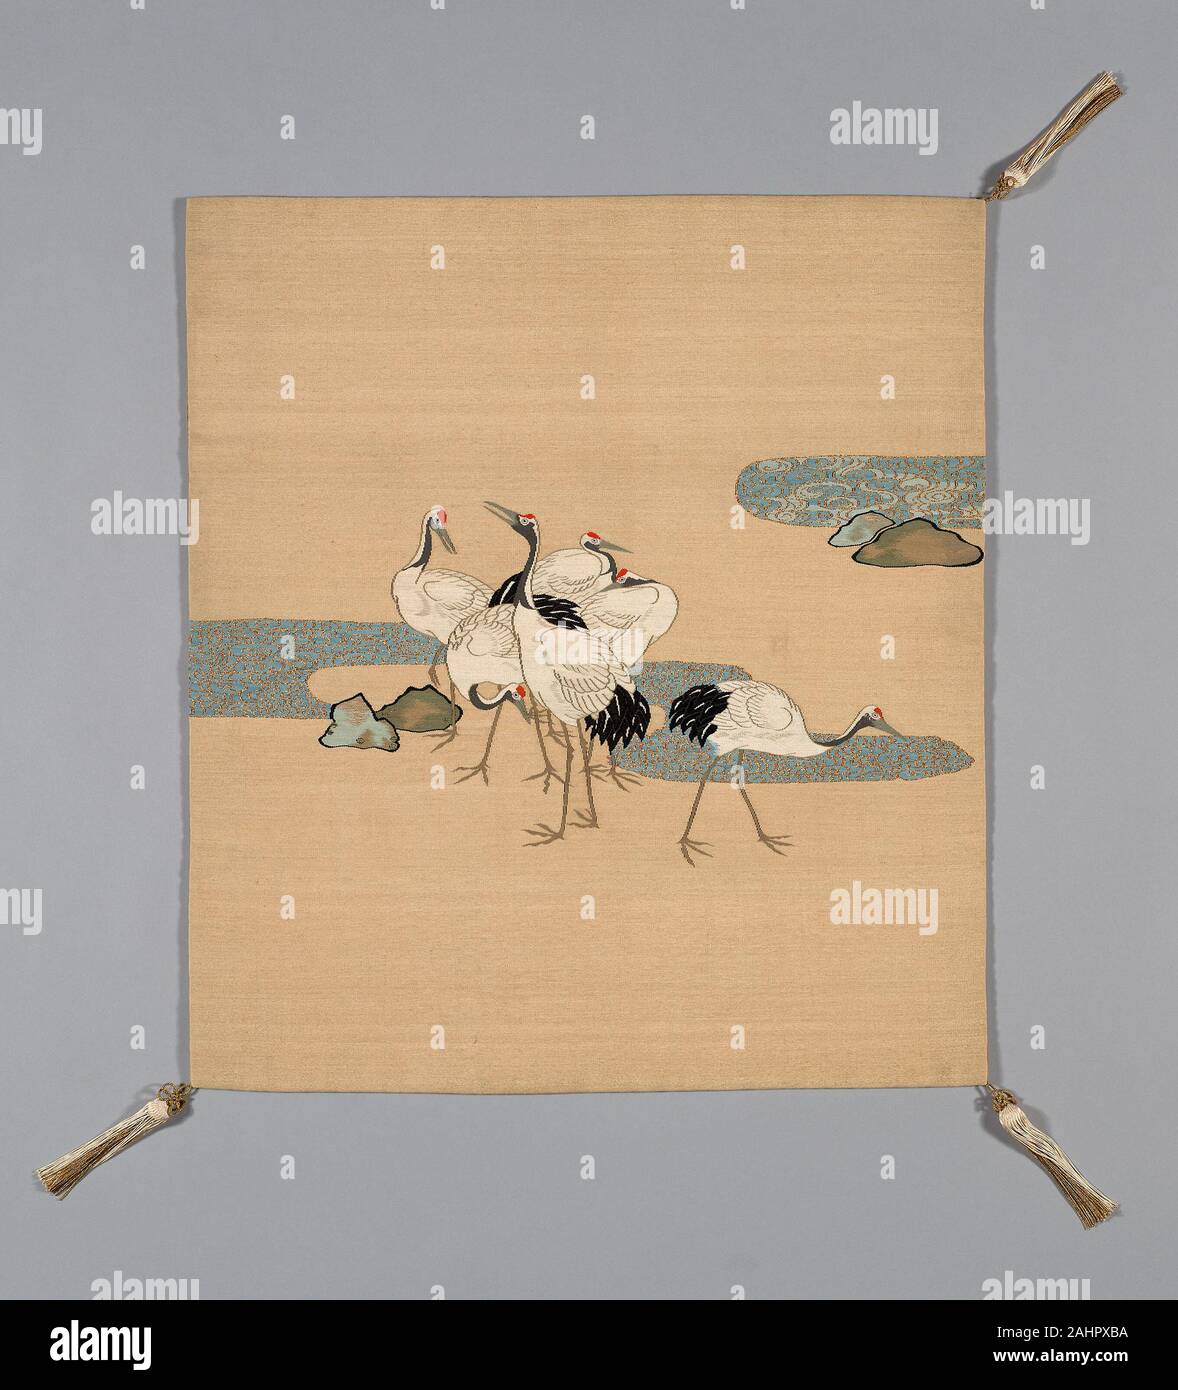 Fukusa (Gift Cover). 1801–1900. Japan. Mon side silk, warp-faced, weft ribbed plain weave (shioze); dye extracted through stenciled chemical dye stripper (bassen); patterned side cotton, silk and gold-leaf-over-lacquered-paper strip wrapped silk, slit tapestry weave with wrapped outlining wefts (tsuzure); paper interlining; Sewn with front and lining matched in size (Tachikiri awase); corners silk, gold-leaf-over-lacquered-paper strip wrapped silk, tubular 1 1 oblique interlacing over cotton core, knotted; silk-wrapped cotton ball and re-plied silk, gold-leaf-over-lacquered-paper strip wrapped Stock Photo